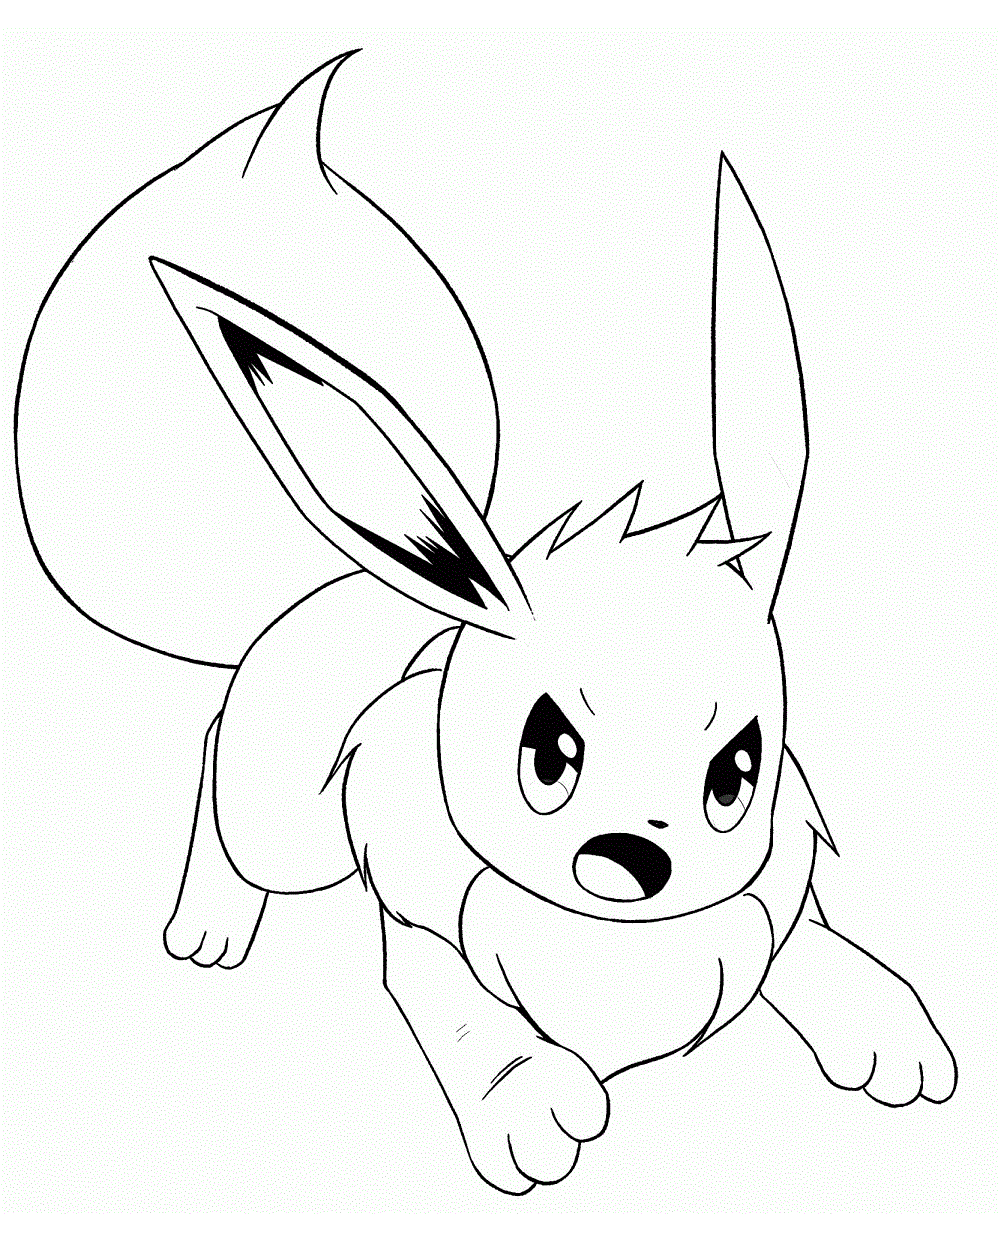 Angry Eevee Coloring Page